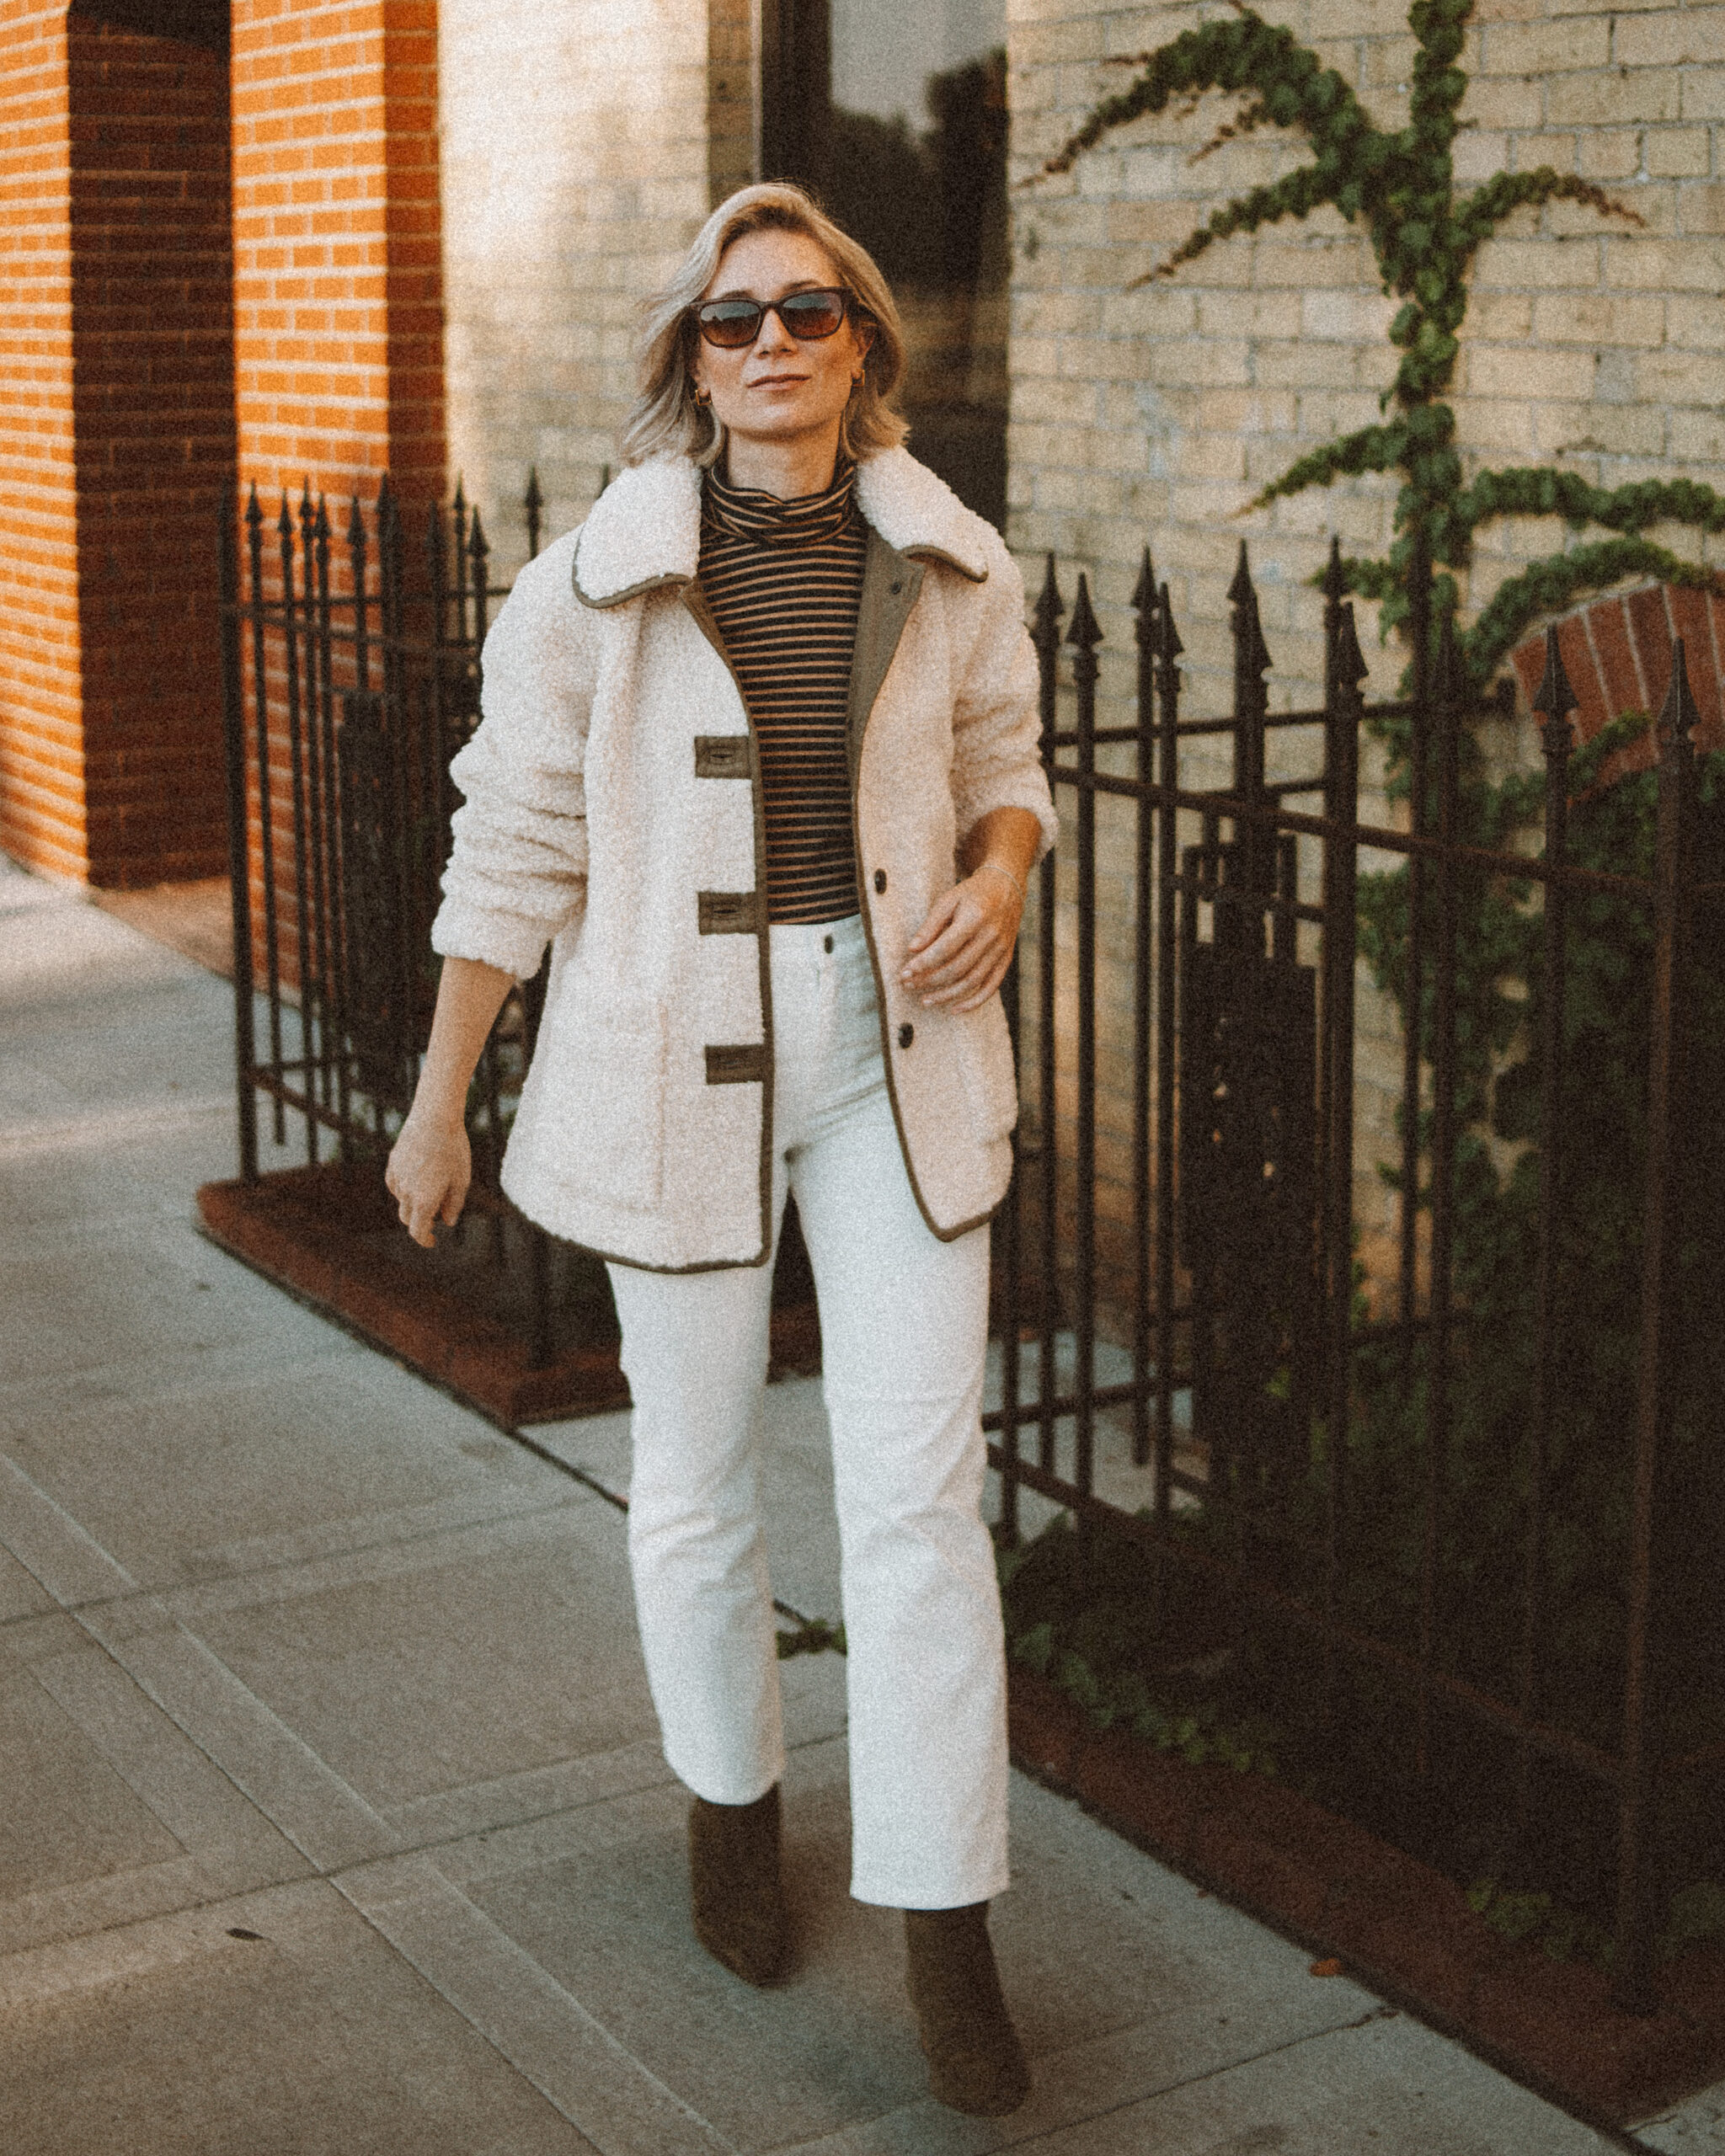 Karin Emily wears the perfect pair of corduroy pants with a striped turtleneck, sherpa jacket, and heeled booties